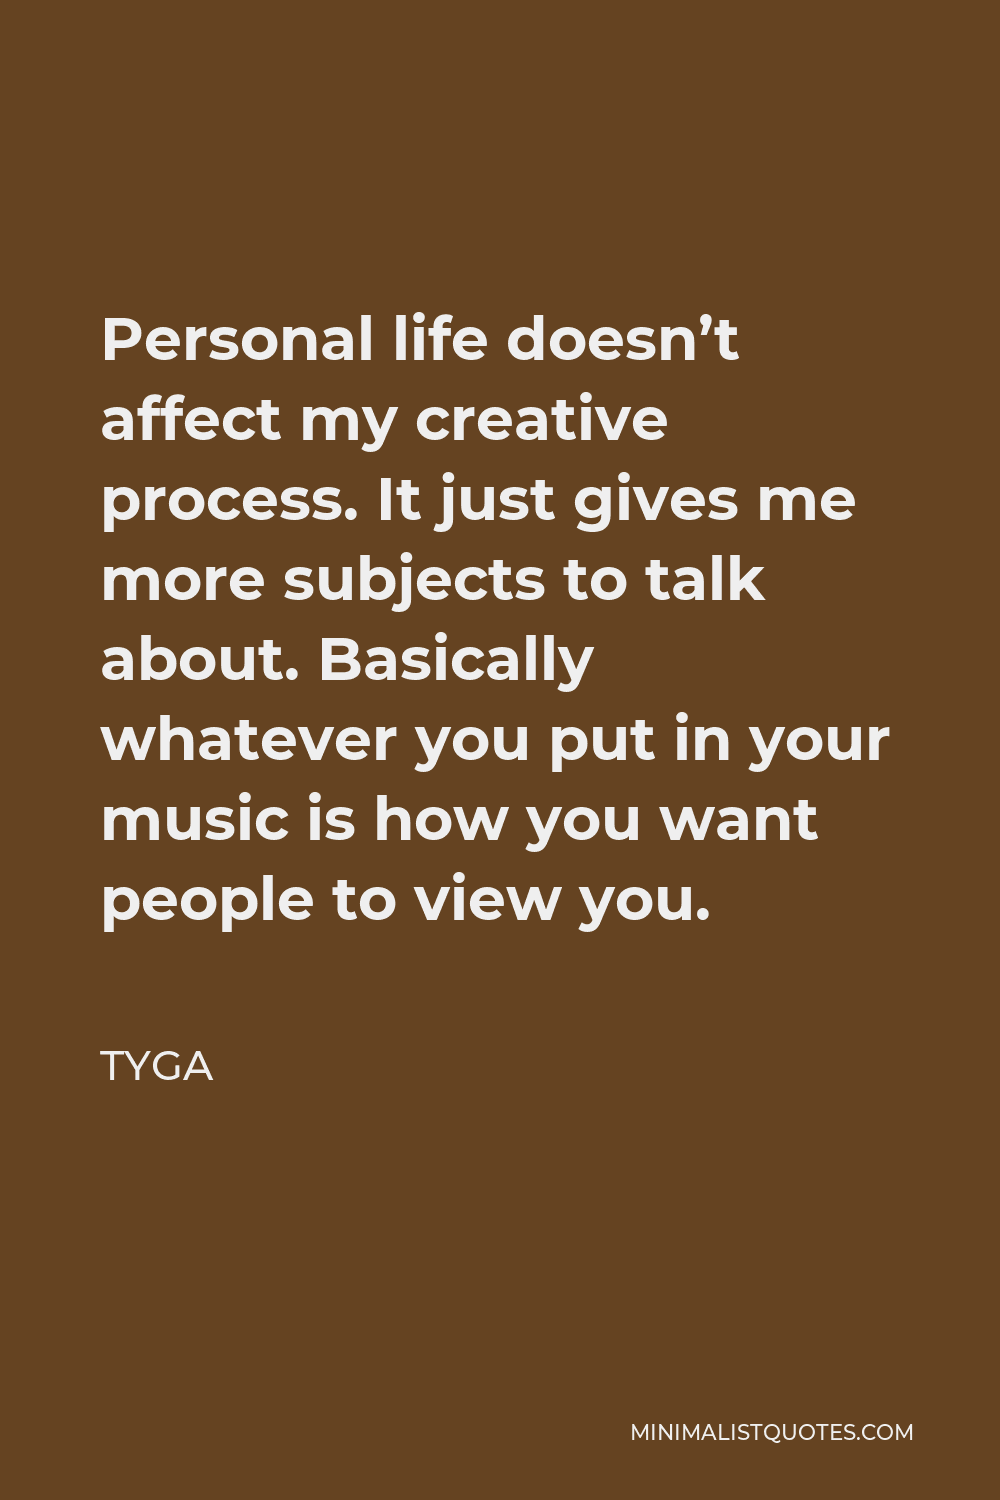 Tyga Quote - Personal life doesn’t affect my creative process. It just gives me more subjects to talk about. Basically whatever you put in your music is how you want people to view you.